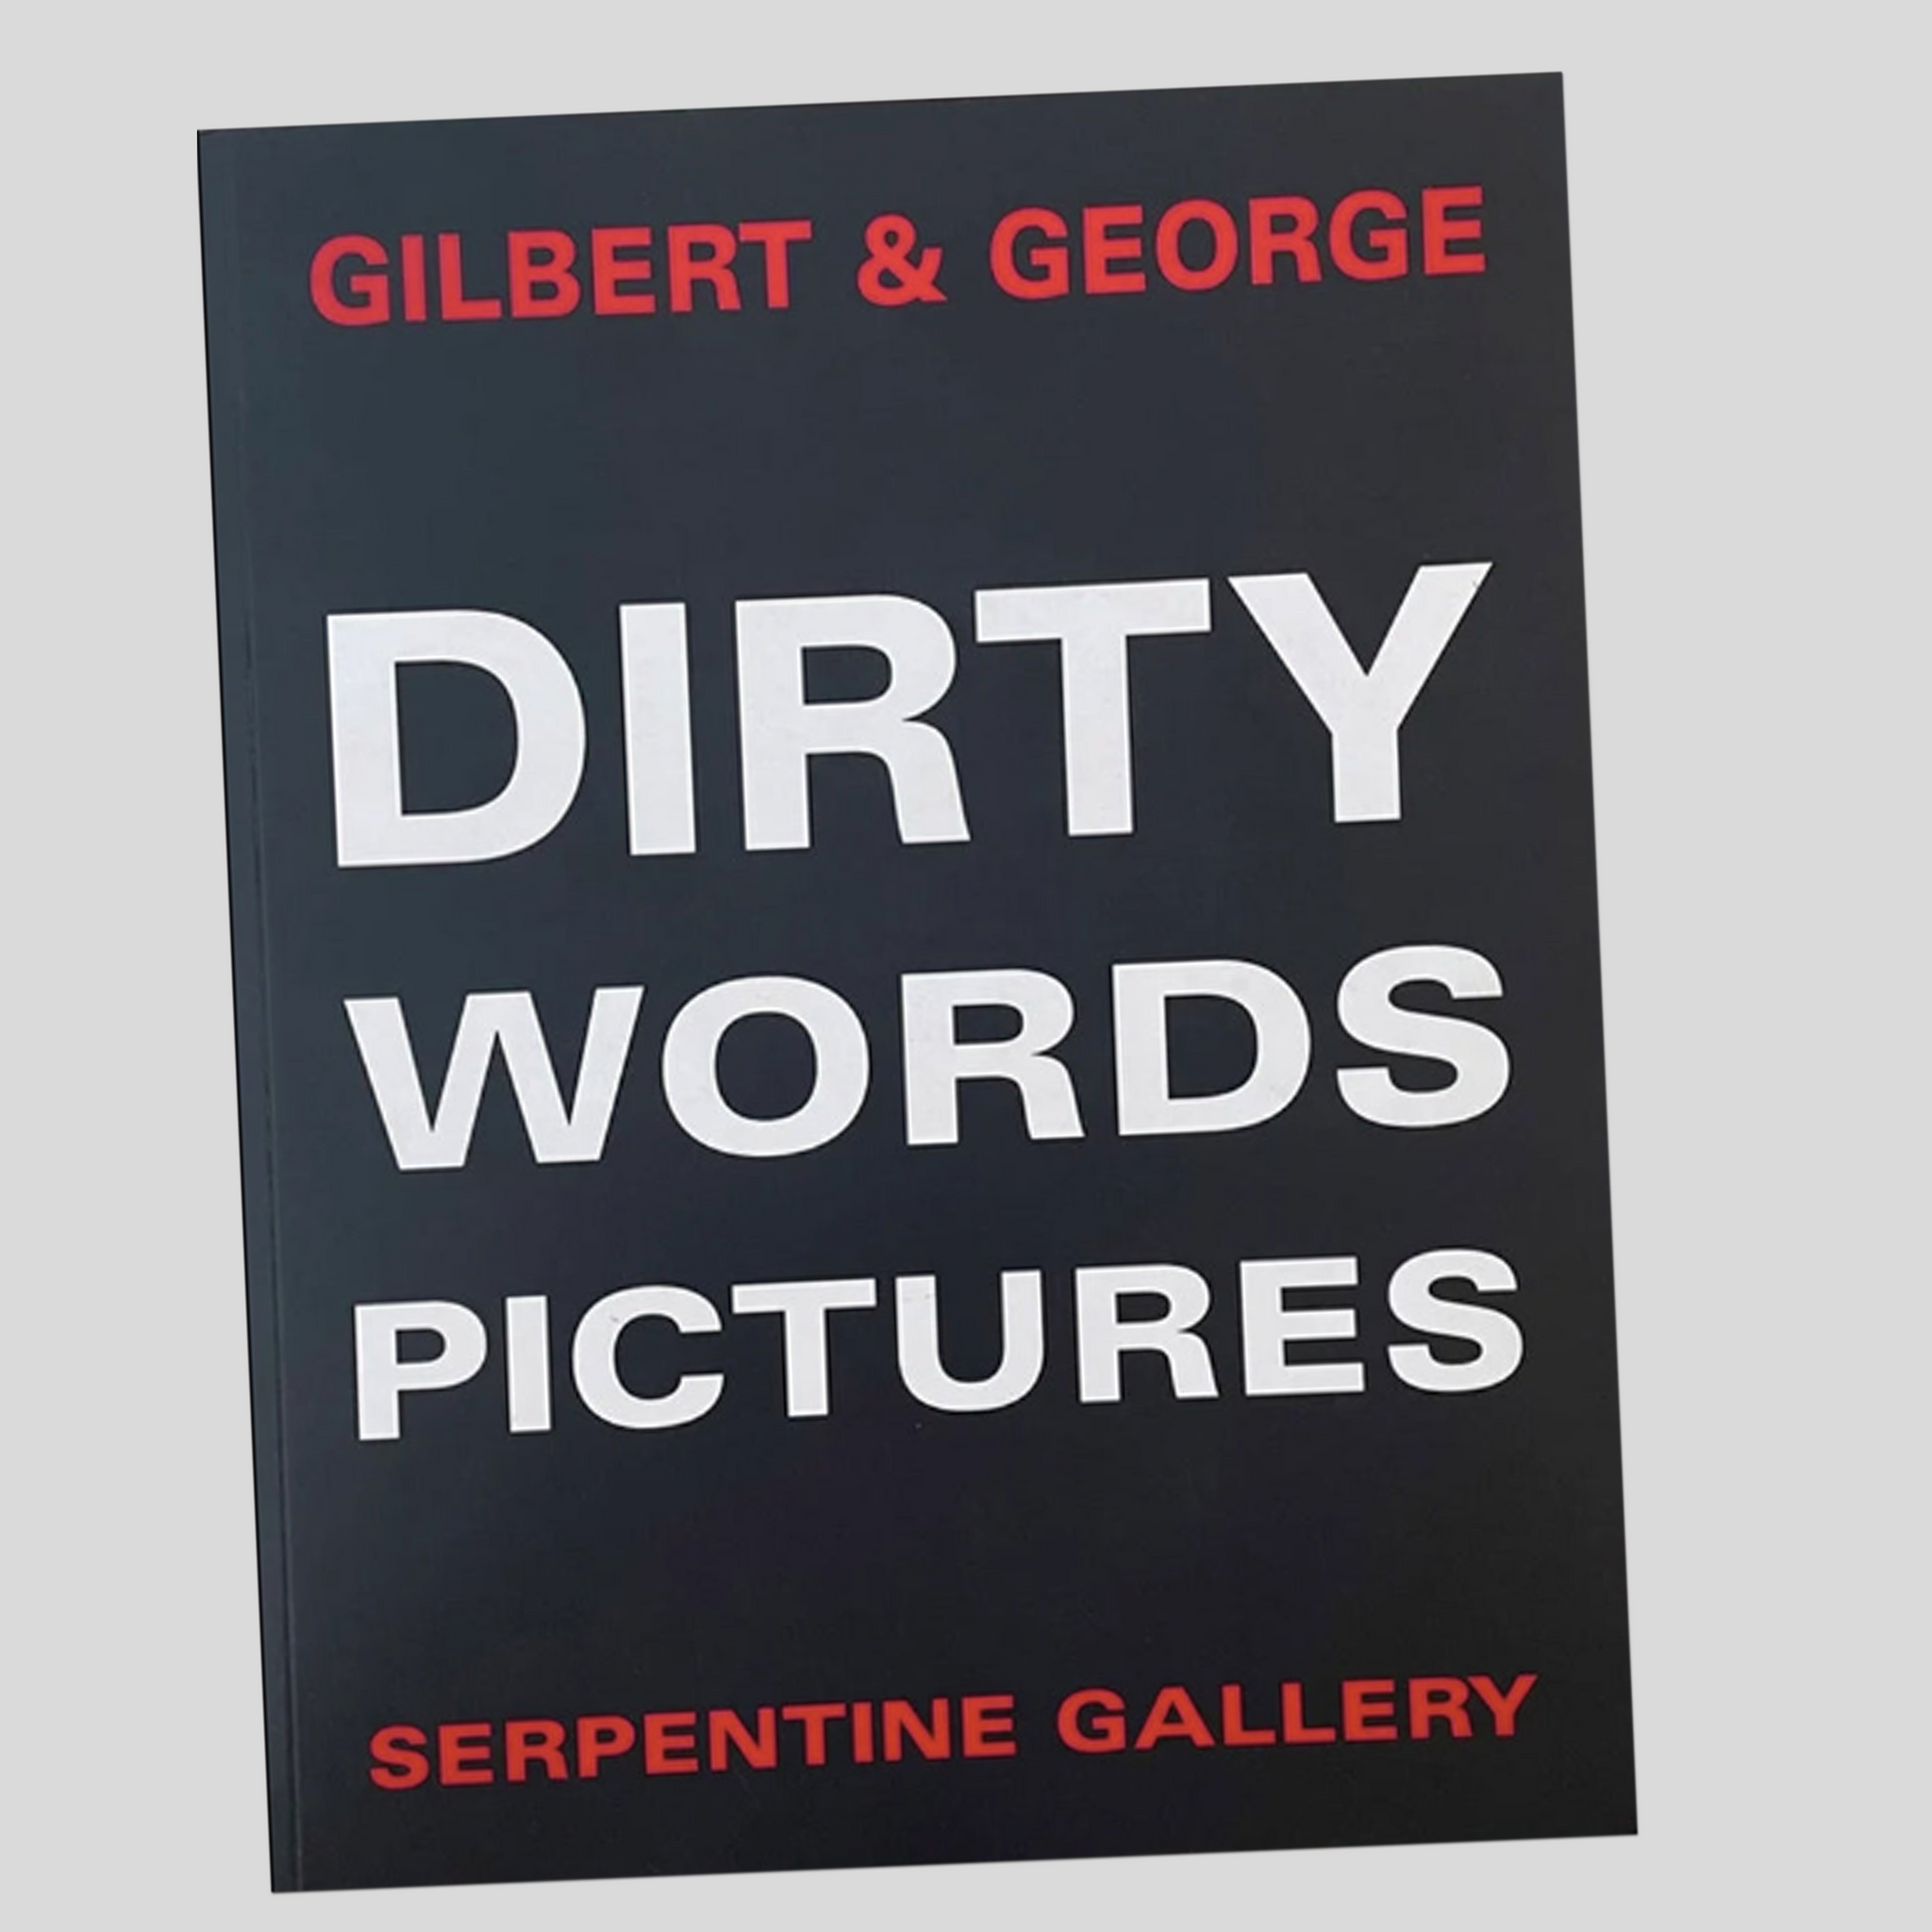 Dirty Words Pictures - Gilbert & George